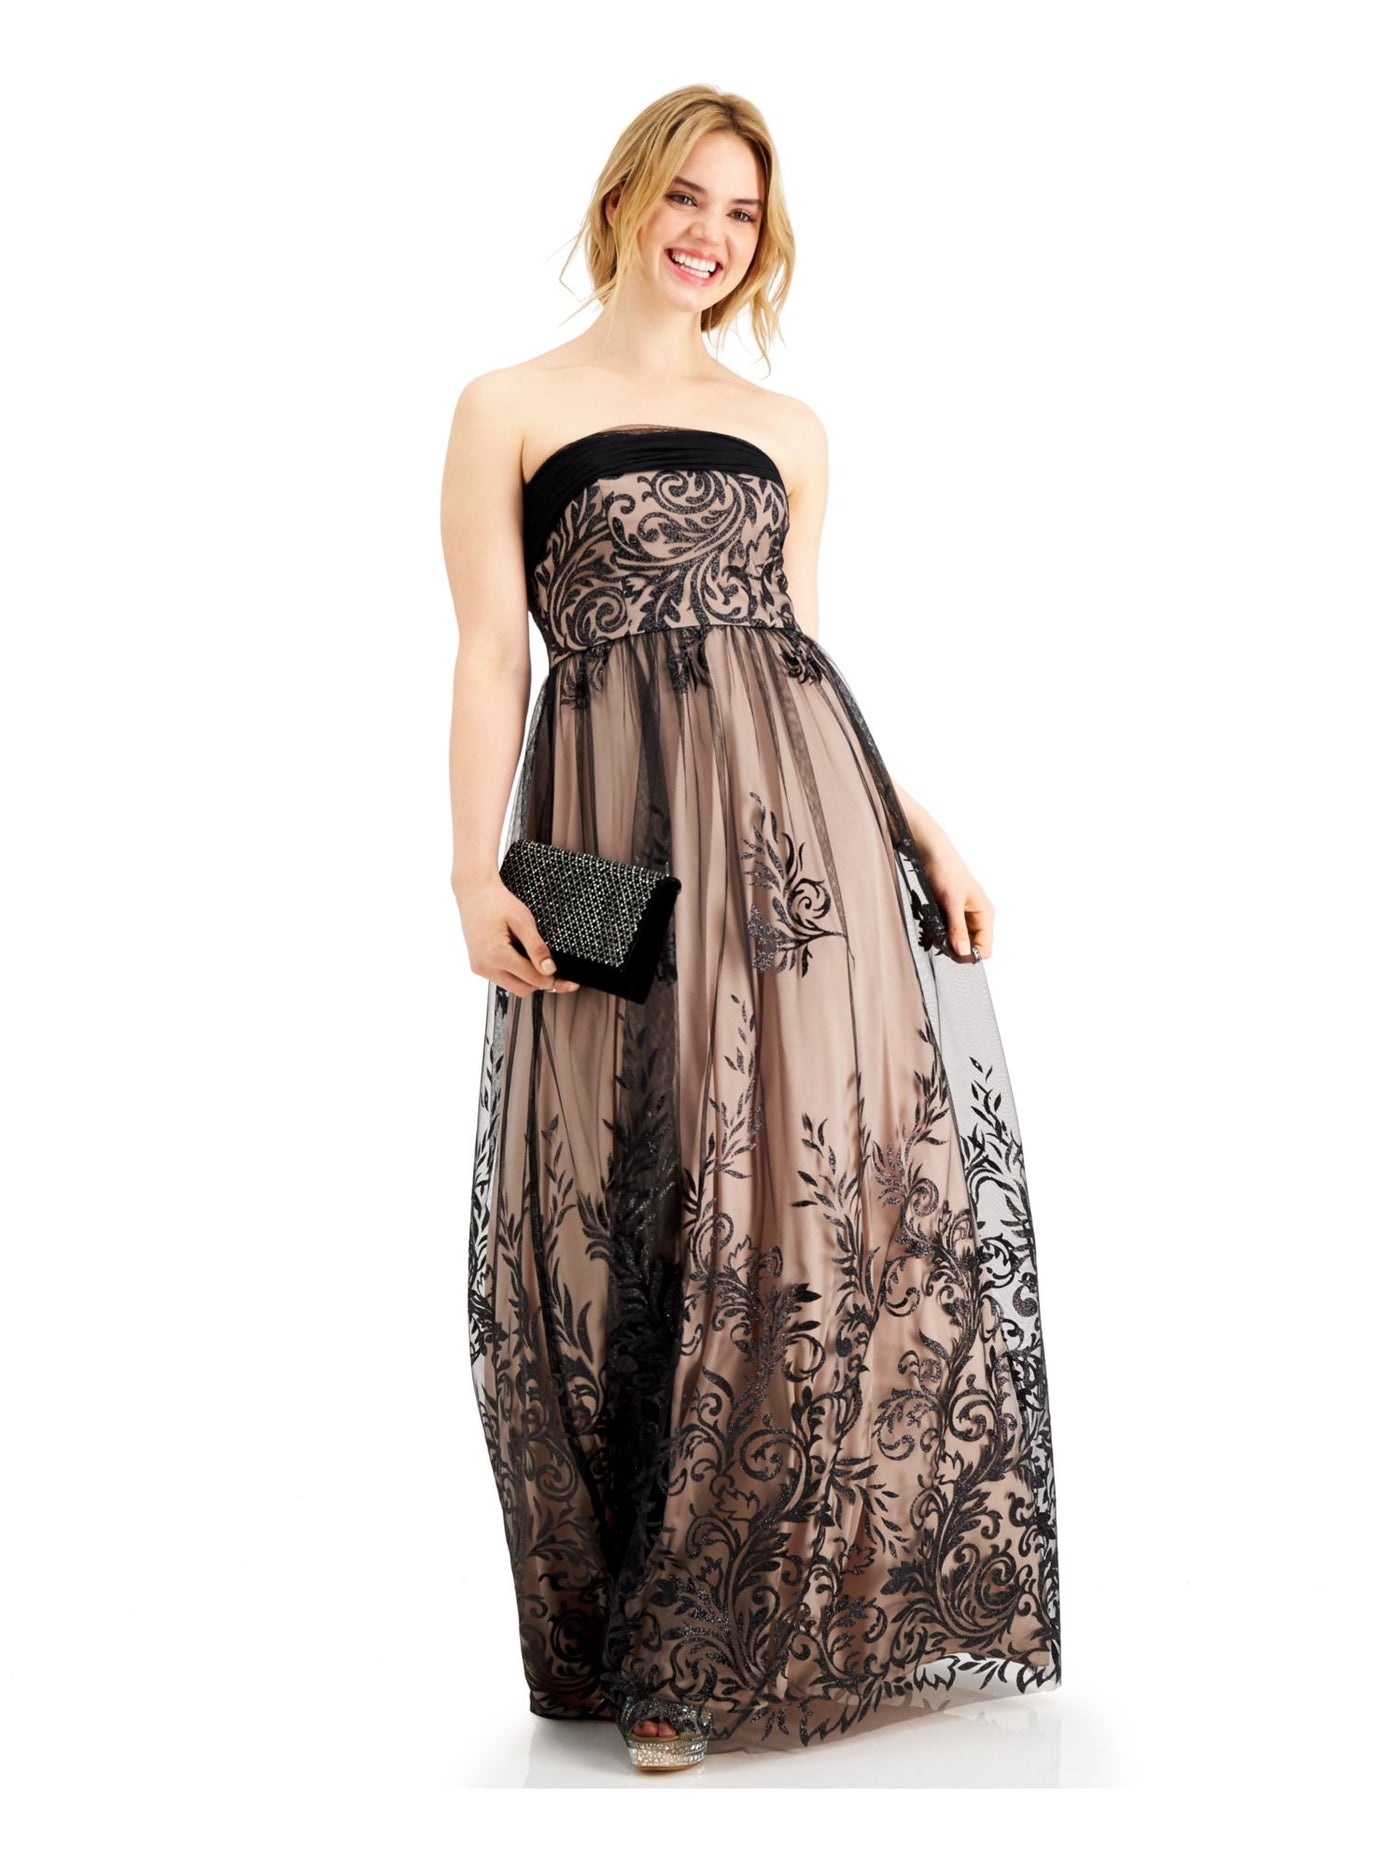 TEEZE ME Womens Lace Glitter Strapless Full-Length Prom Fit + Flare Dress